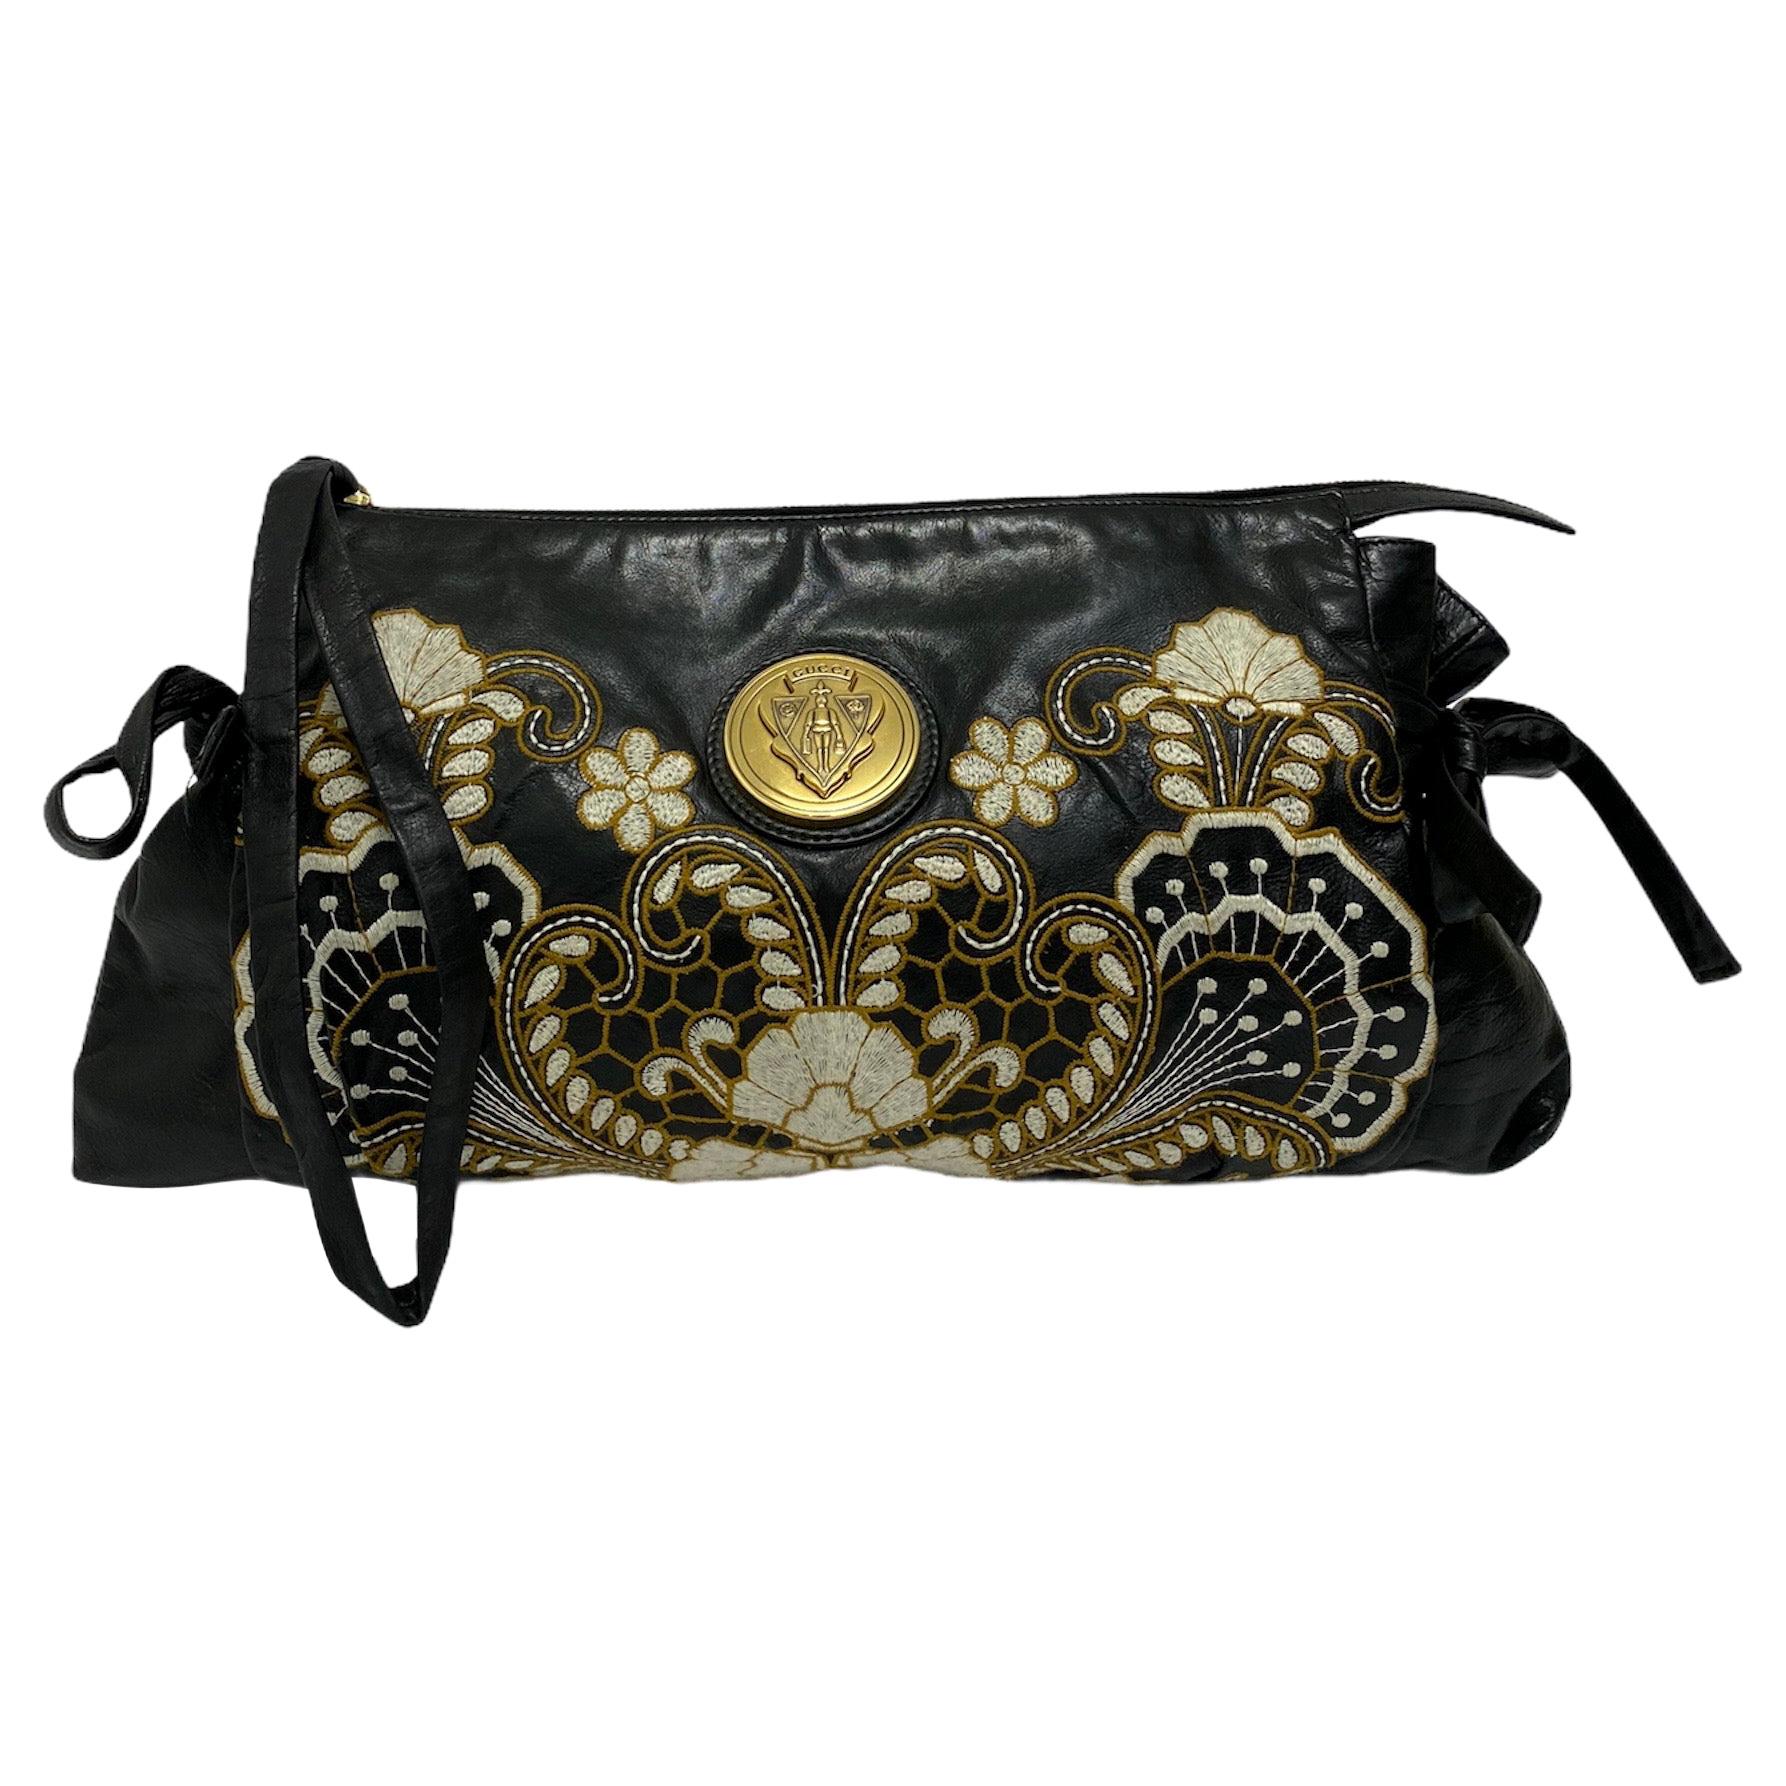 Clutch Gucci Hysteria Bag in Black Leather with Floral Embroidery